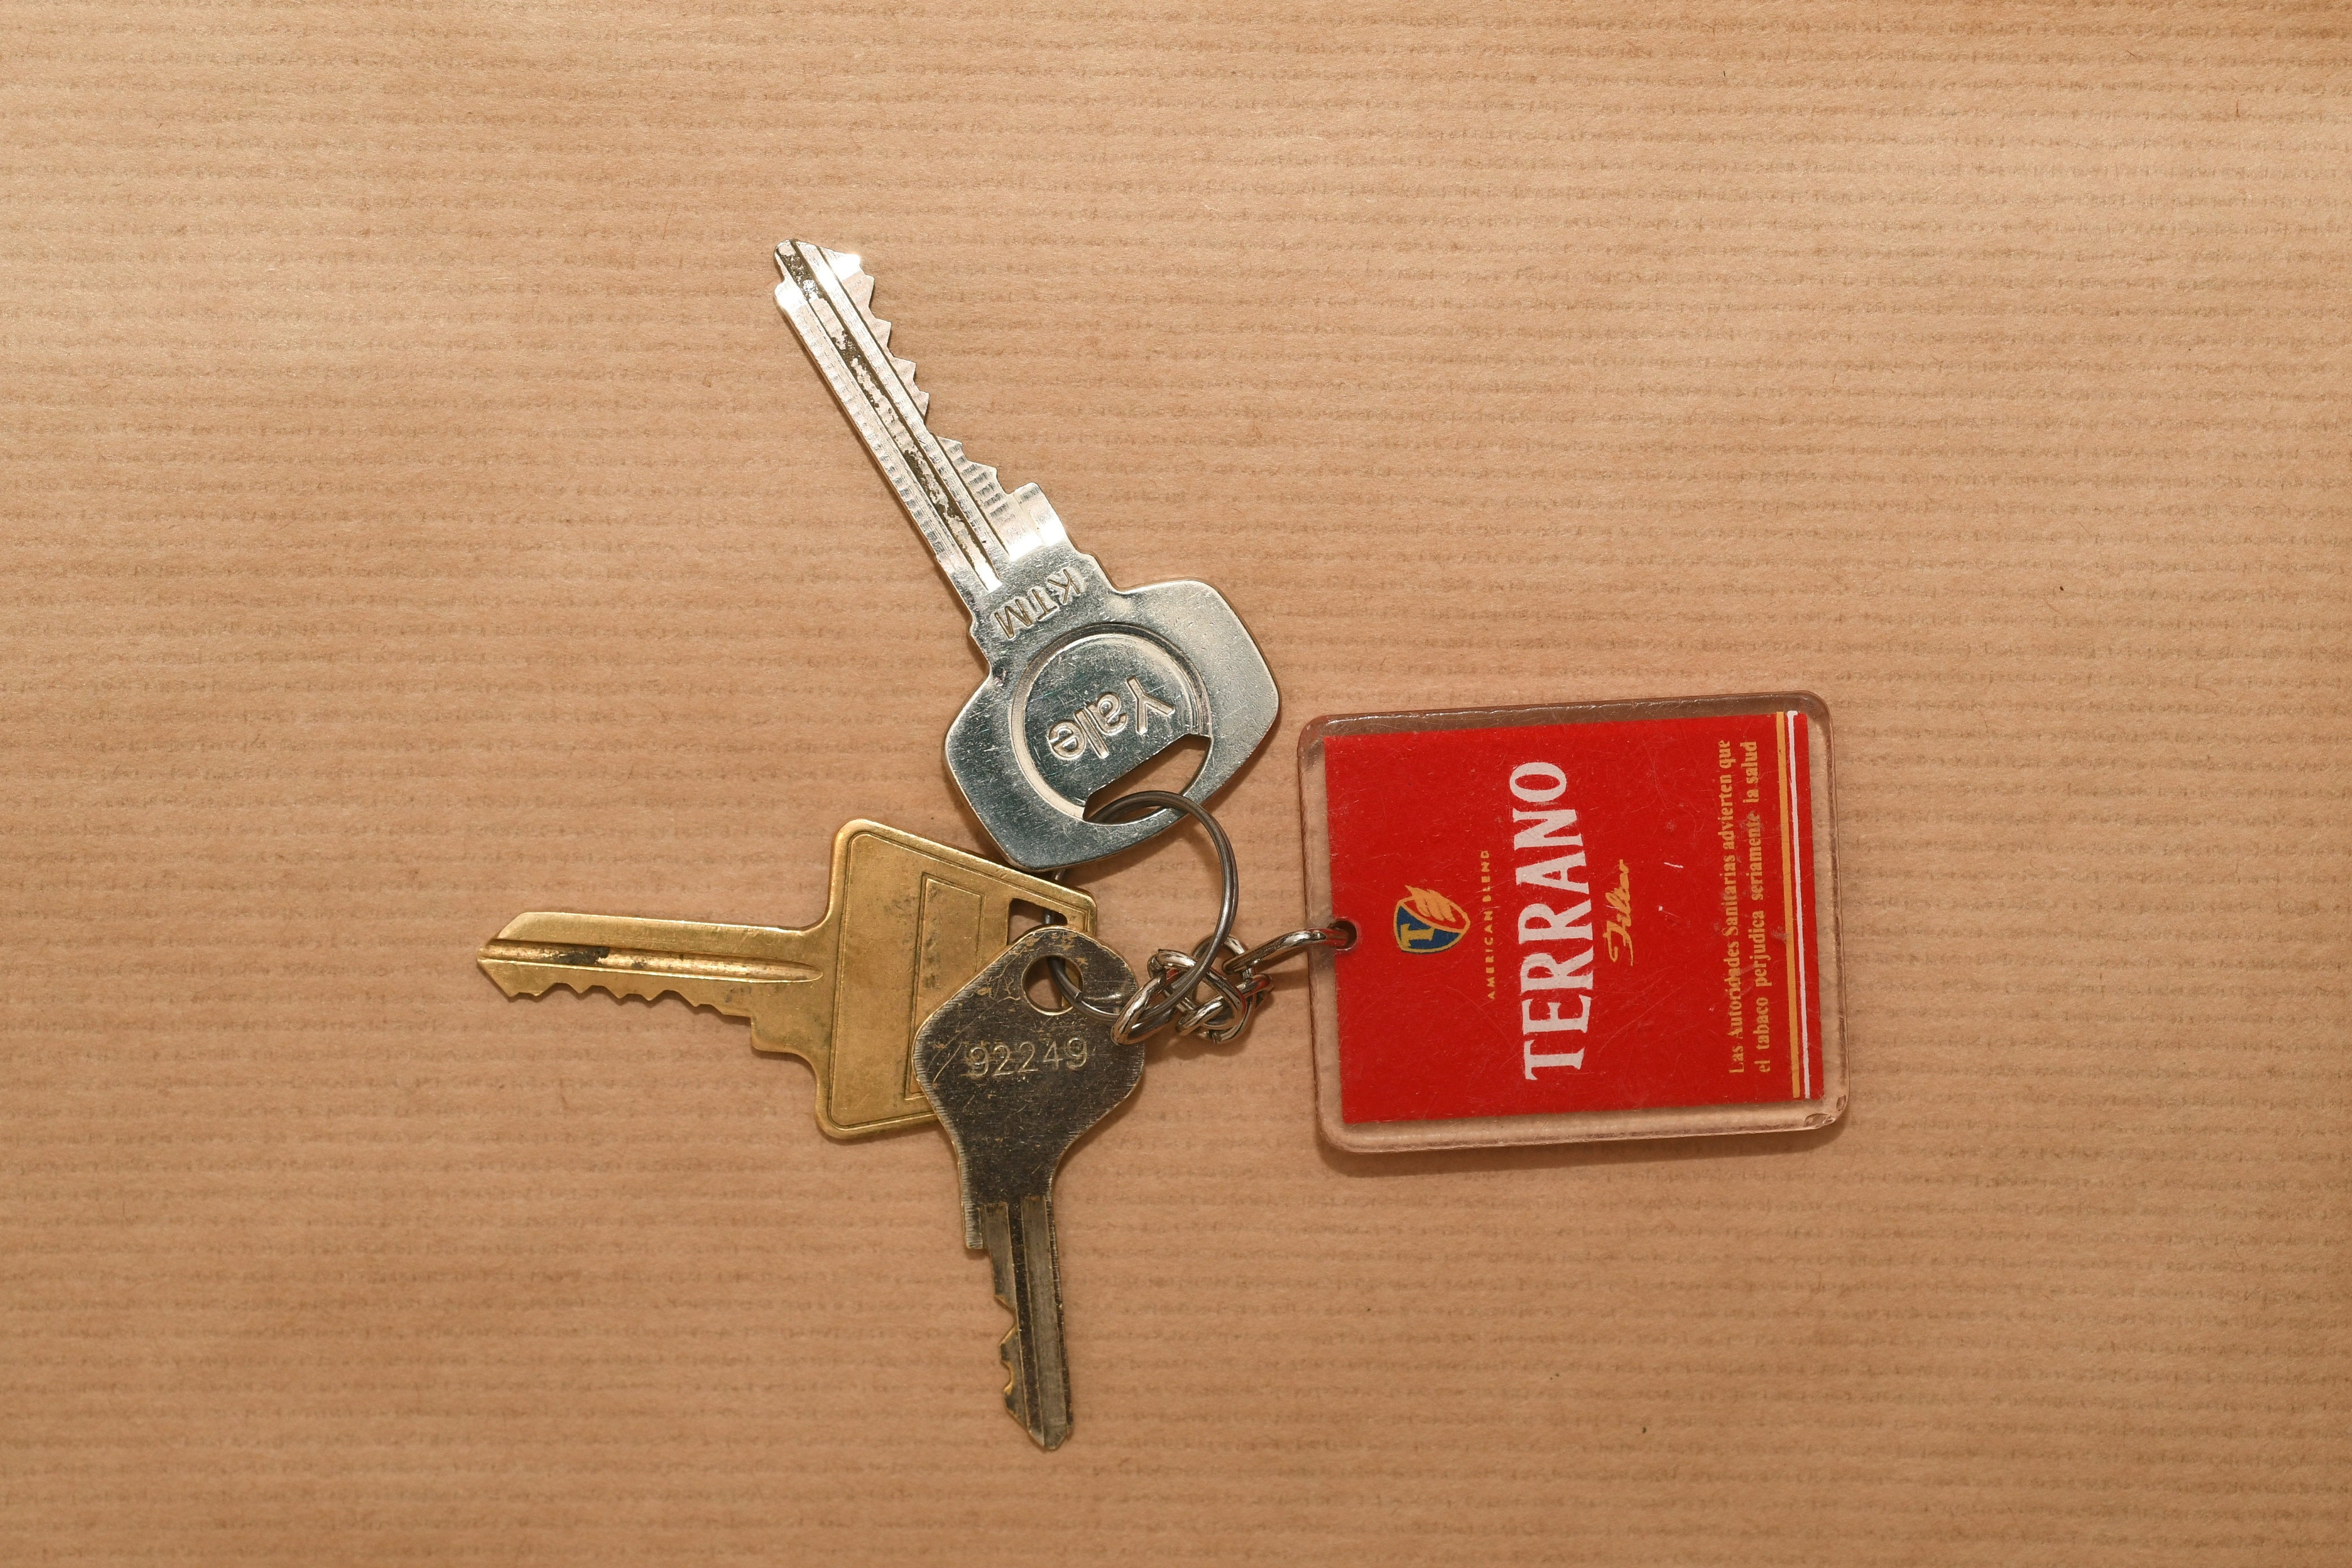 A set of keys with a Spanish keyring, advertising 1990s cigarette brand Terrano was also recovered